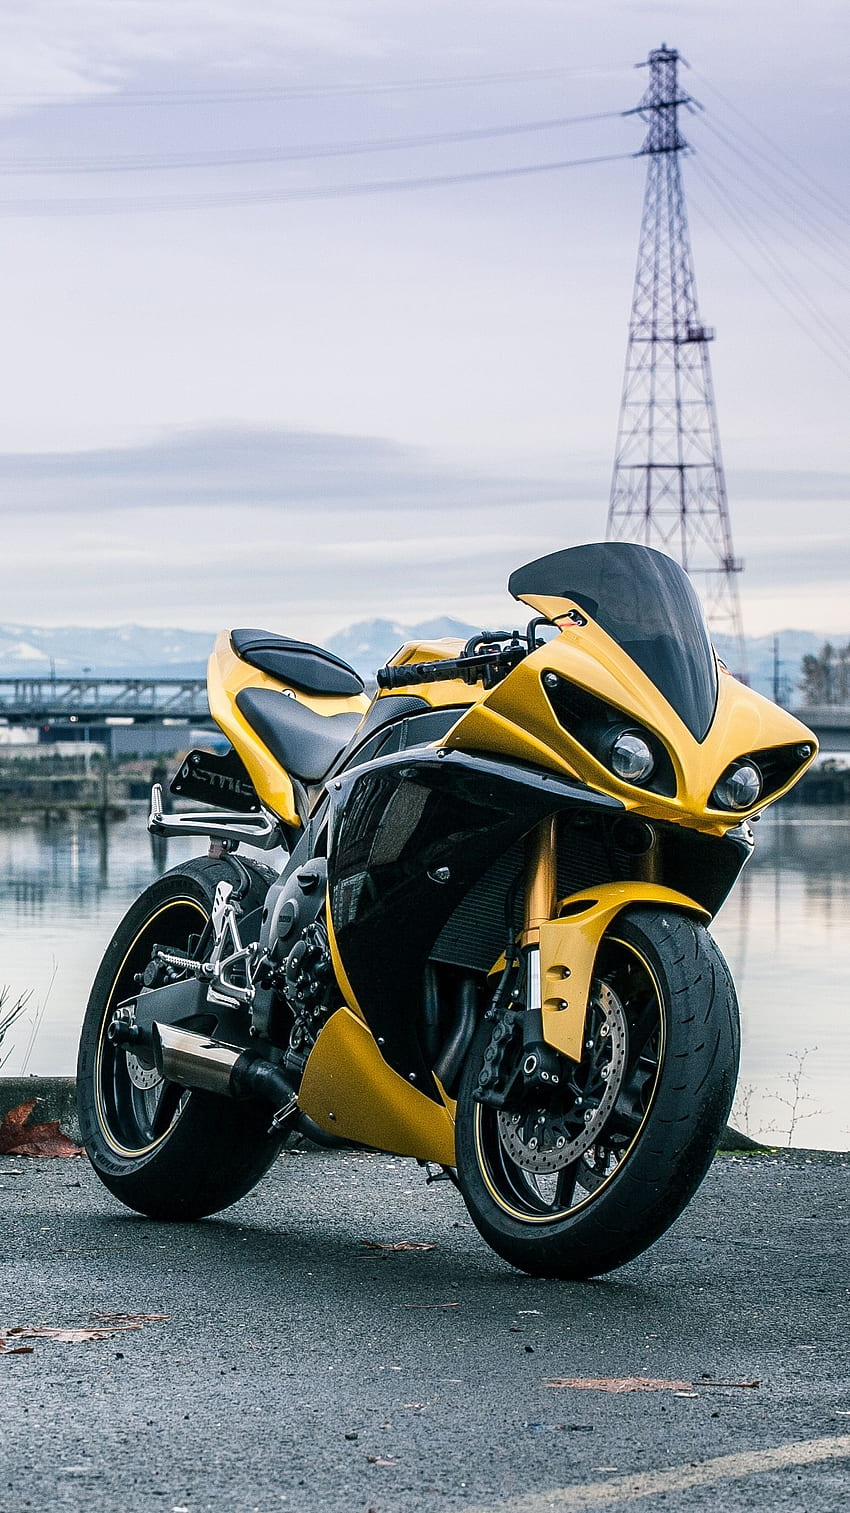 iPhone for iPhone 8, iPhone 8 Plus, iPhone 6s, iPhone 6s Plus, iPhone X and iPod Touch High Quality . Yamaha r1, Yamaha, Motorcycle HD phone wallpaper